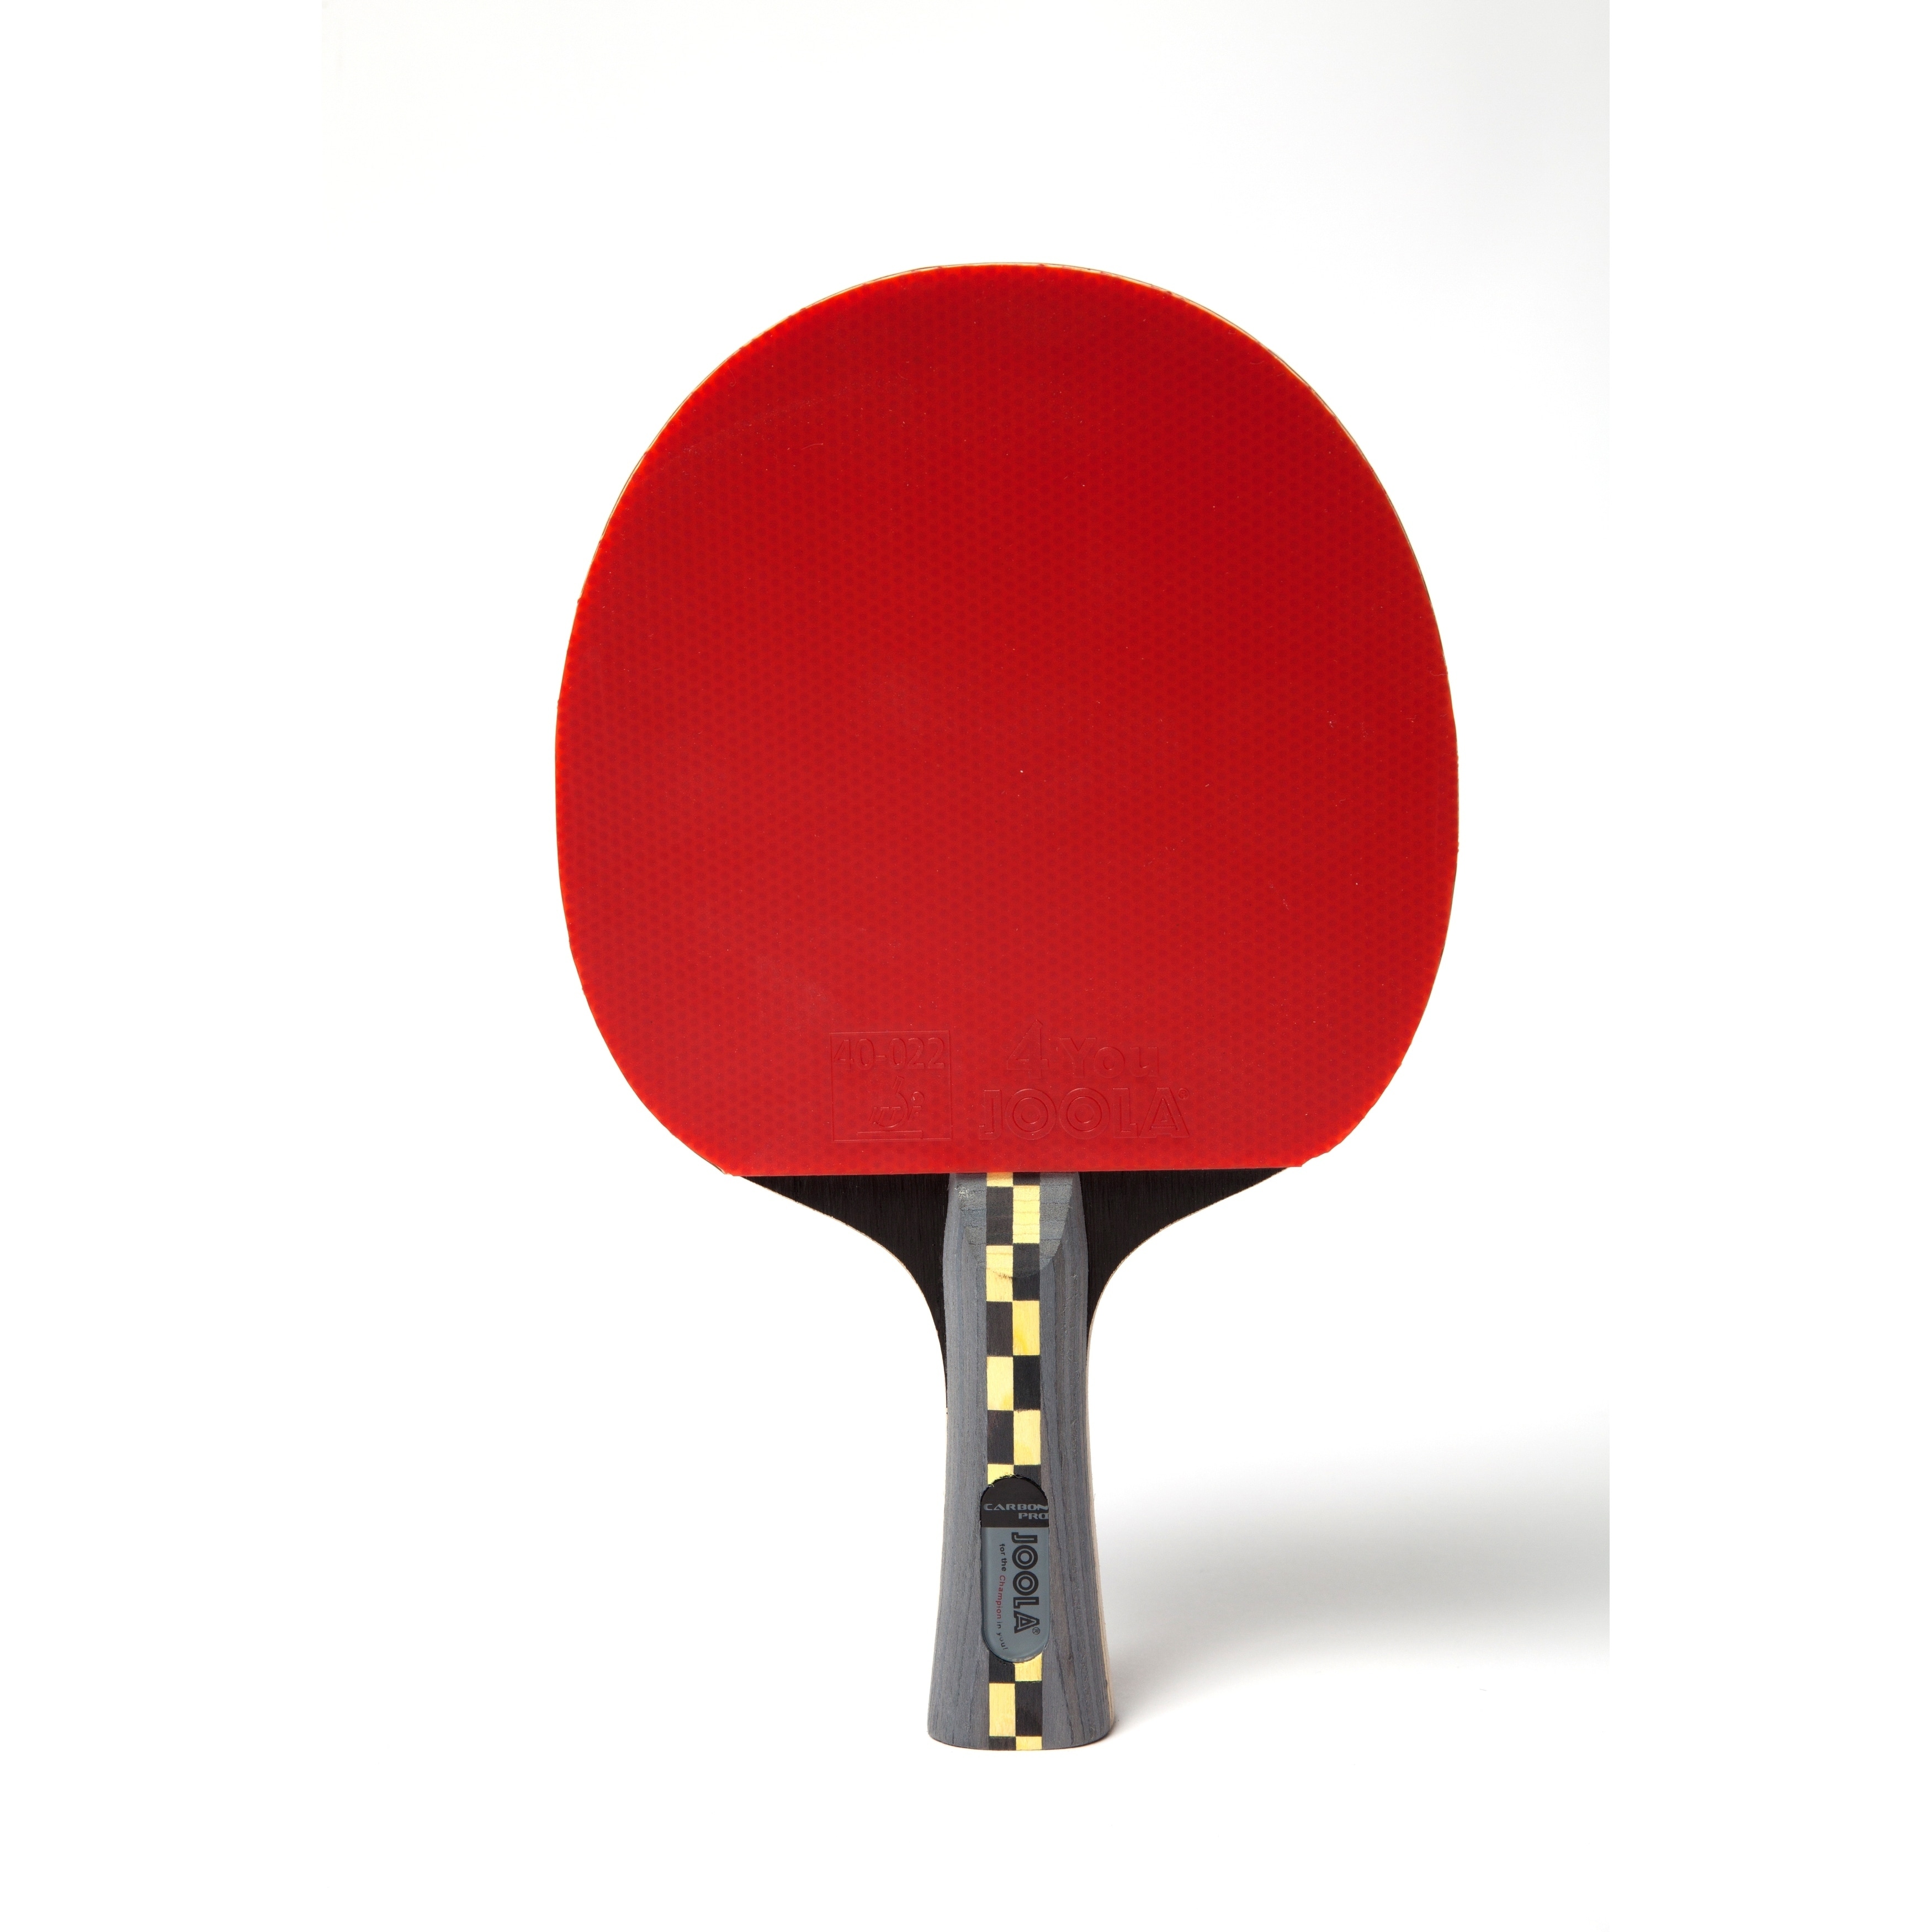 Beyond - Pro Bed Bath JOOLA Carbon - Table Racketundefined Tennis 22378011 & Professional